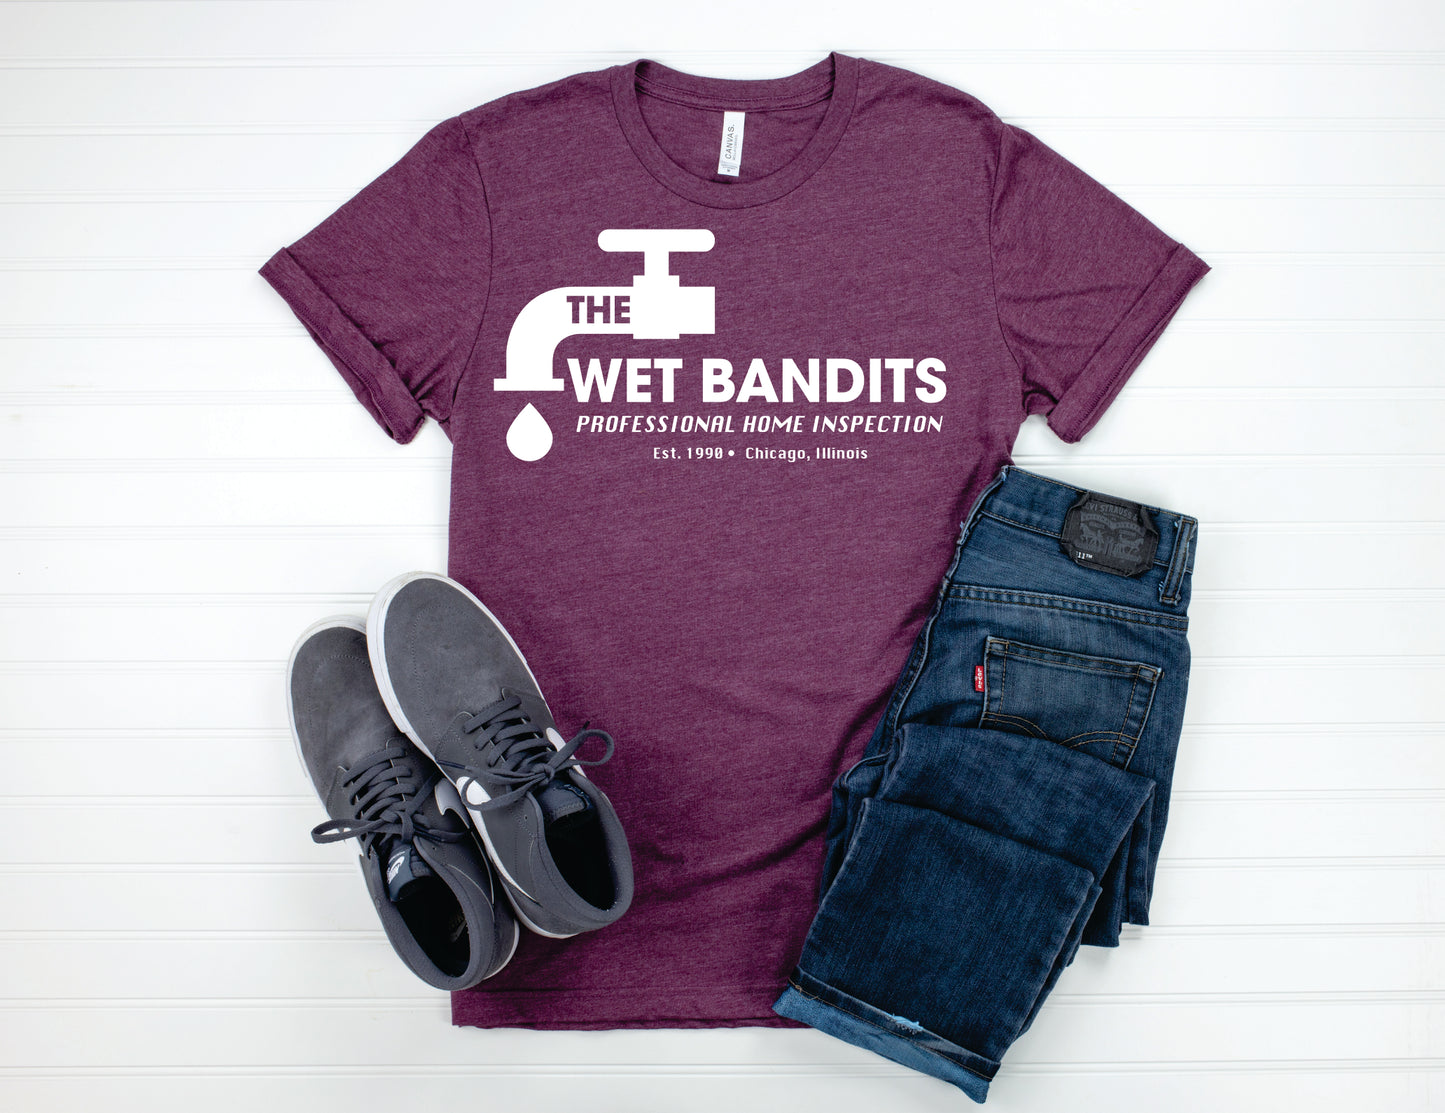 The Wet Bandits Professional Home Inspection Tee